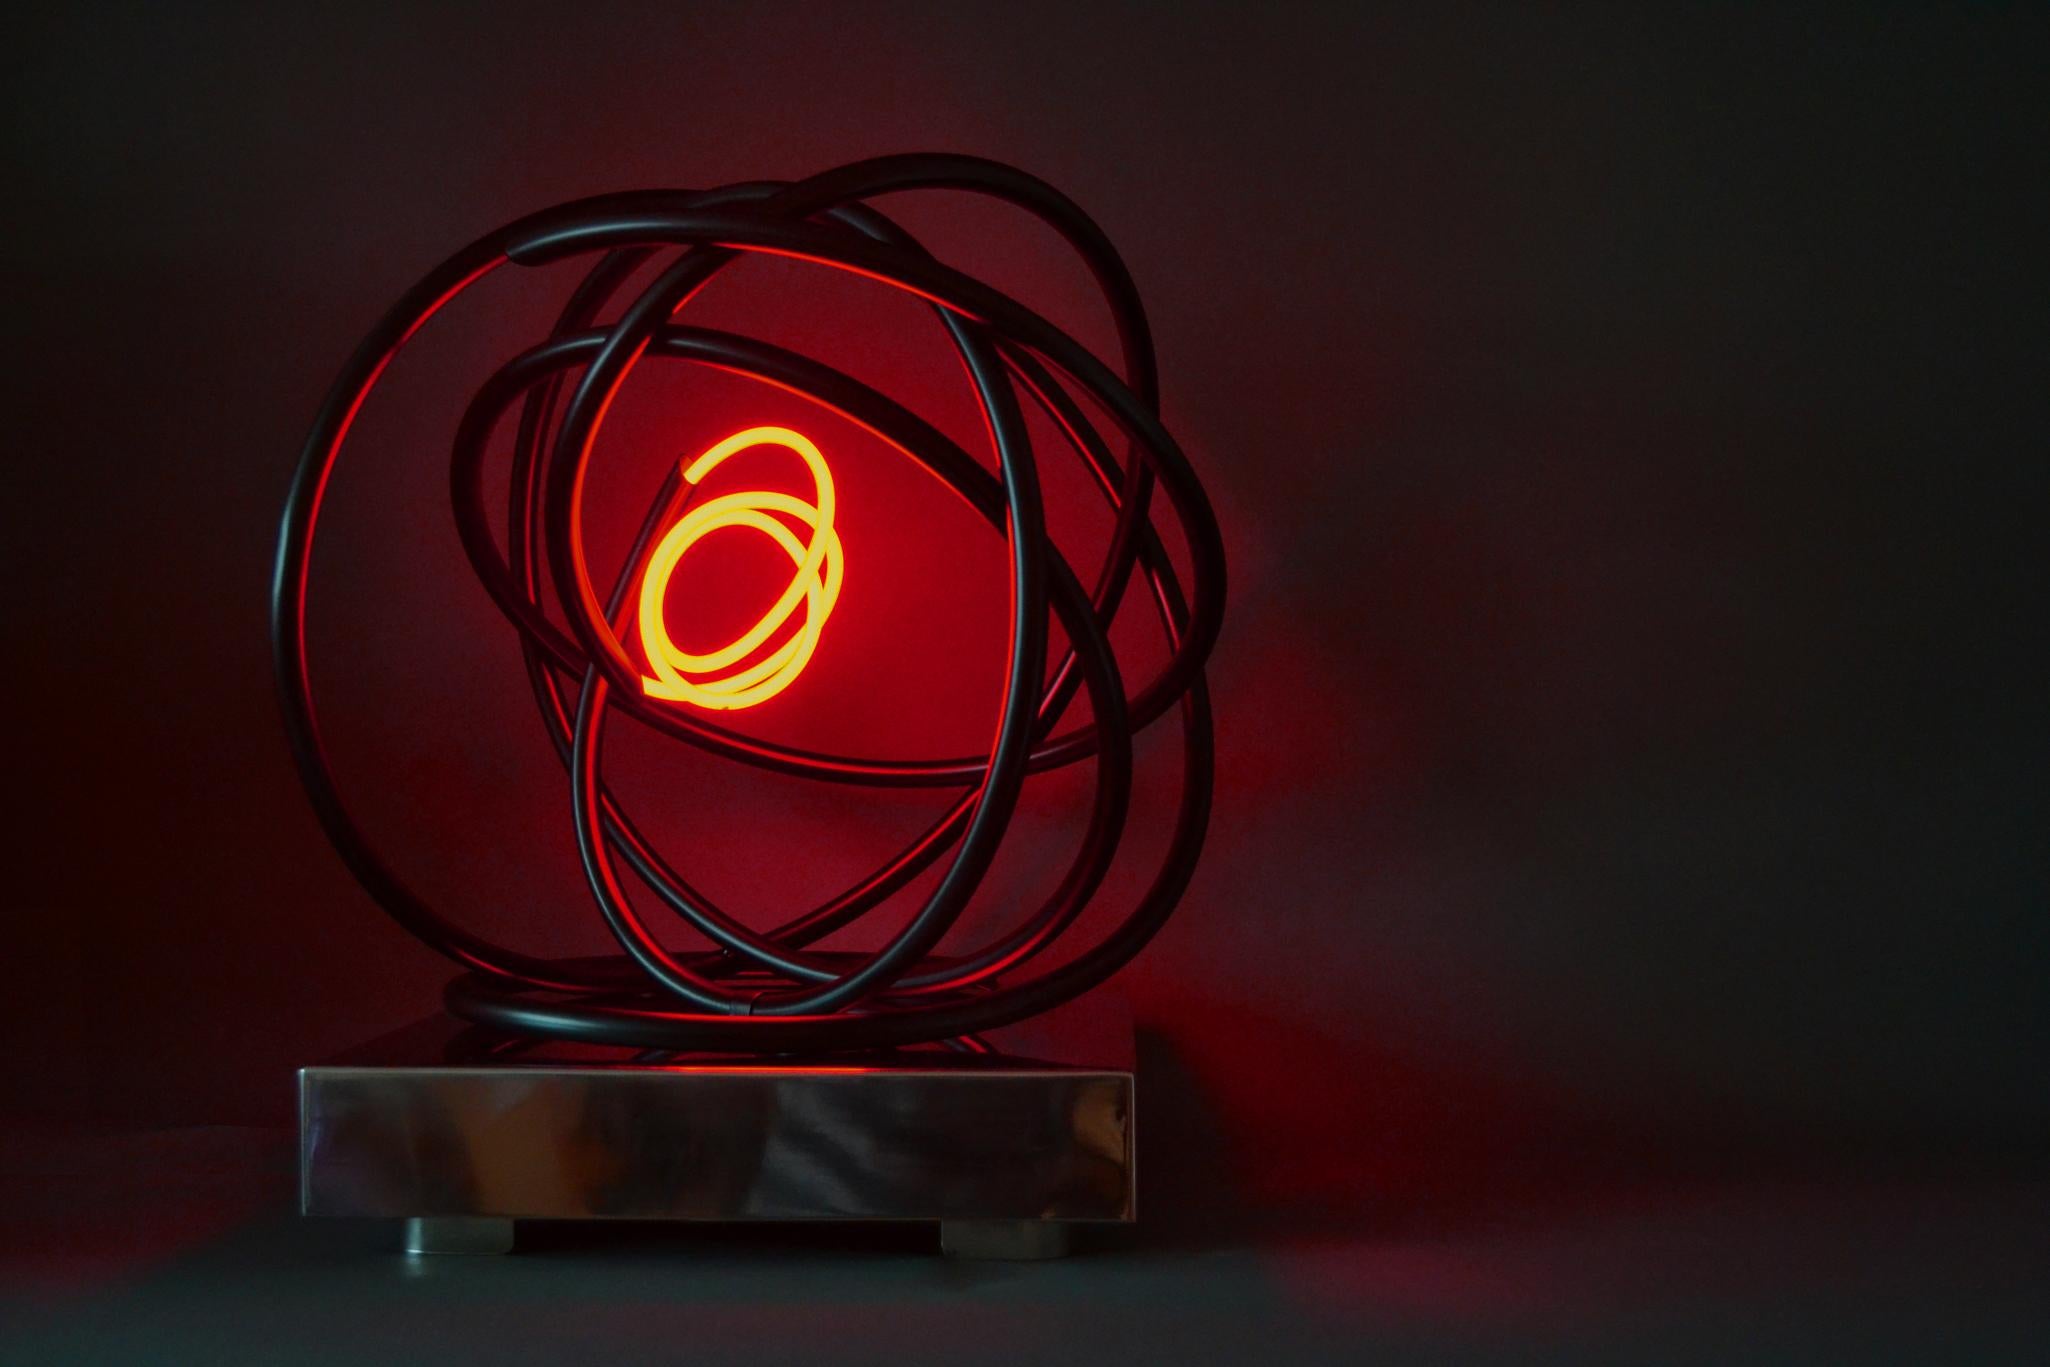 Small Red Neon Orb was first shown at London Art Fair 2018. The sculpture is mounted onto a mirror polished stainless steel plinth, which is perfect for displaying the piece on a table. Small Red Neon Orb also has a floor standing metal plinth, the